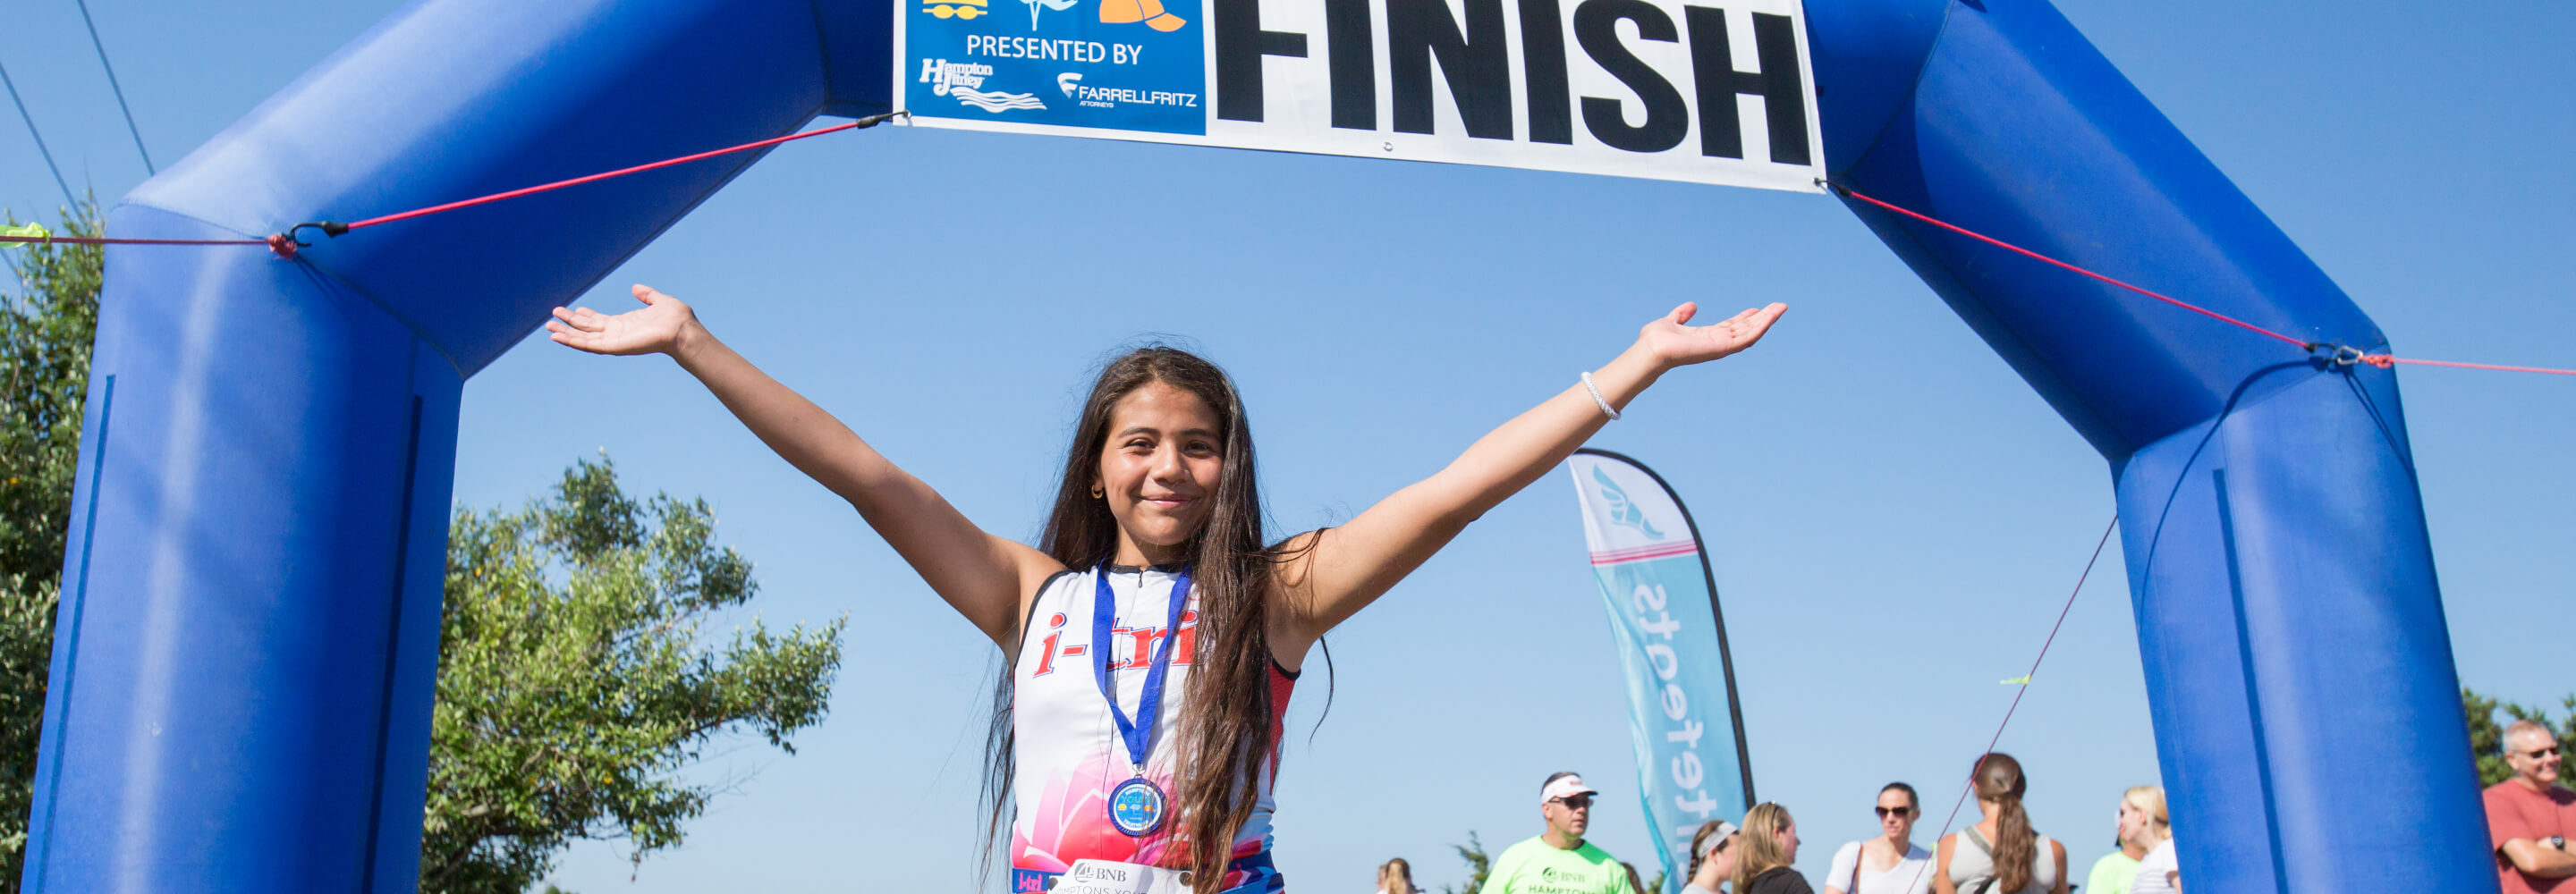 A girl wearing a medal holds her arms up in triumph at the race finish line